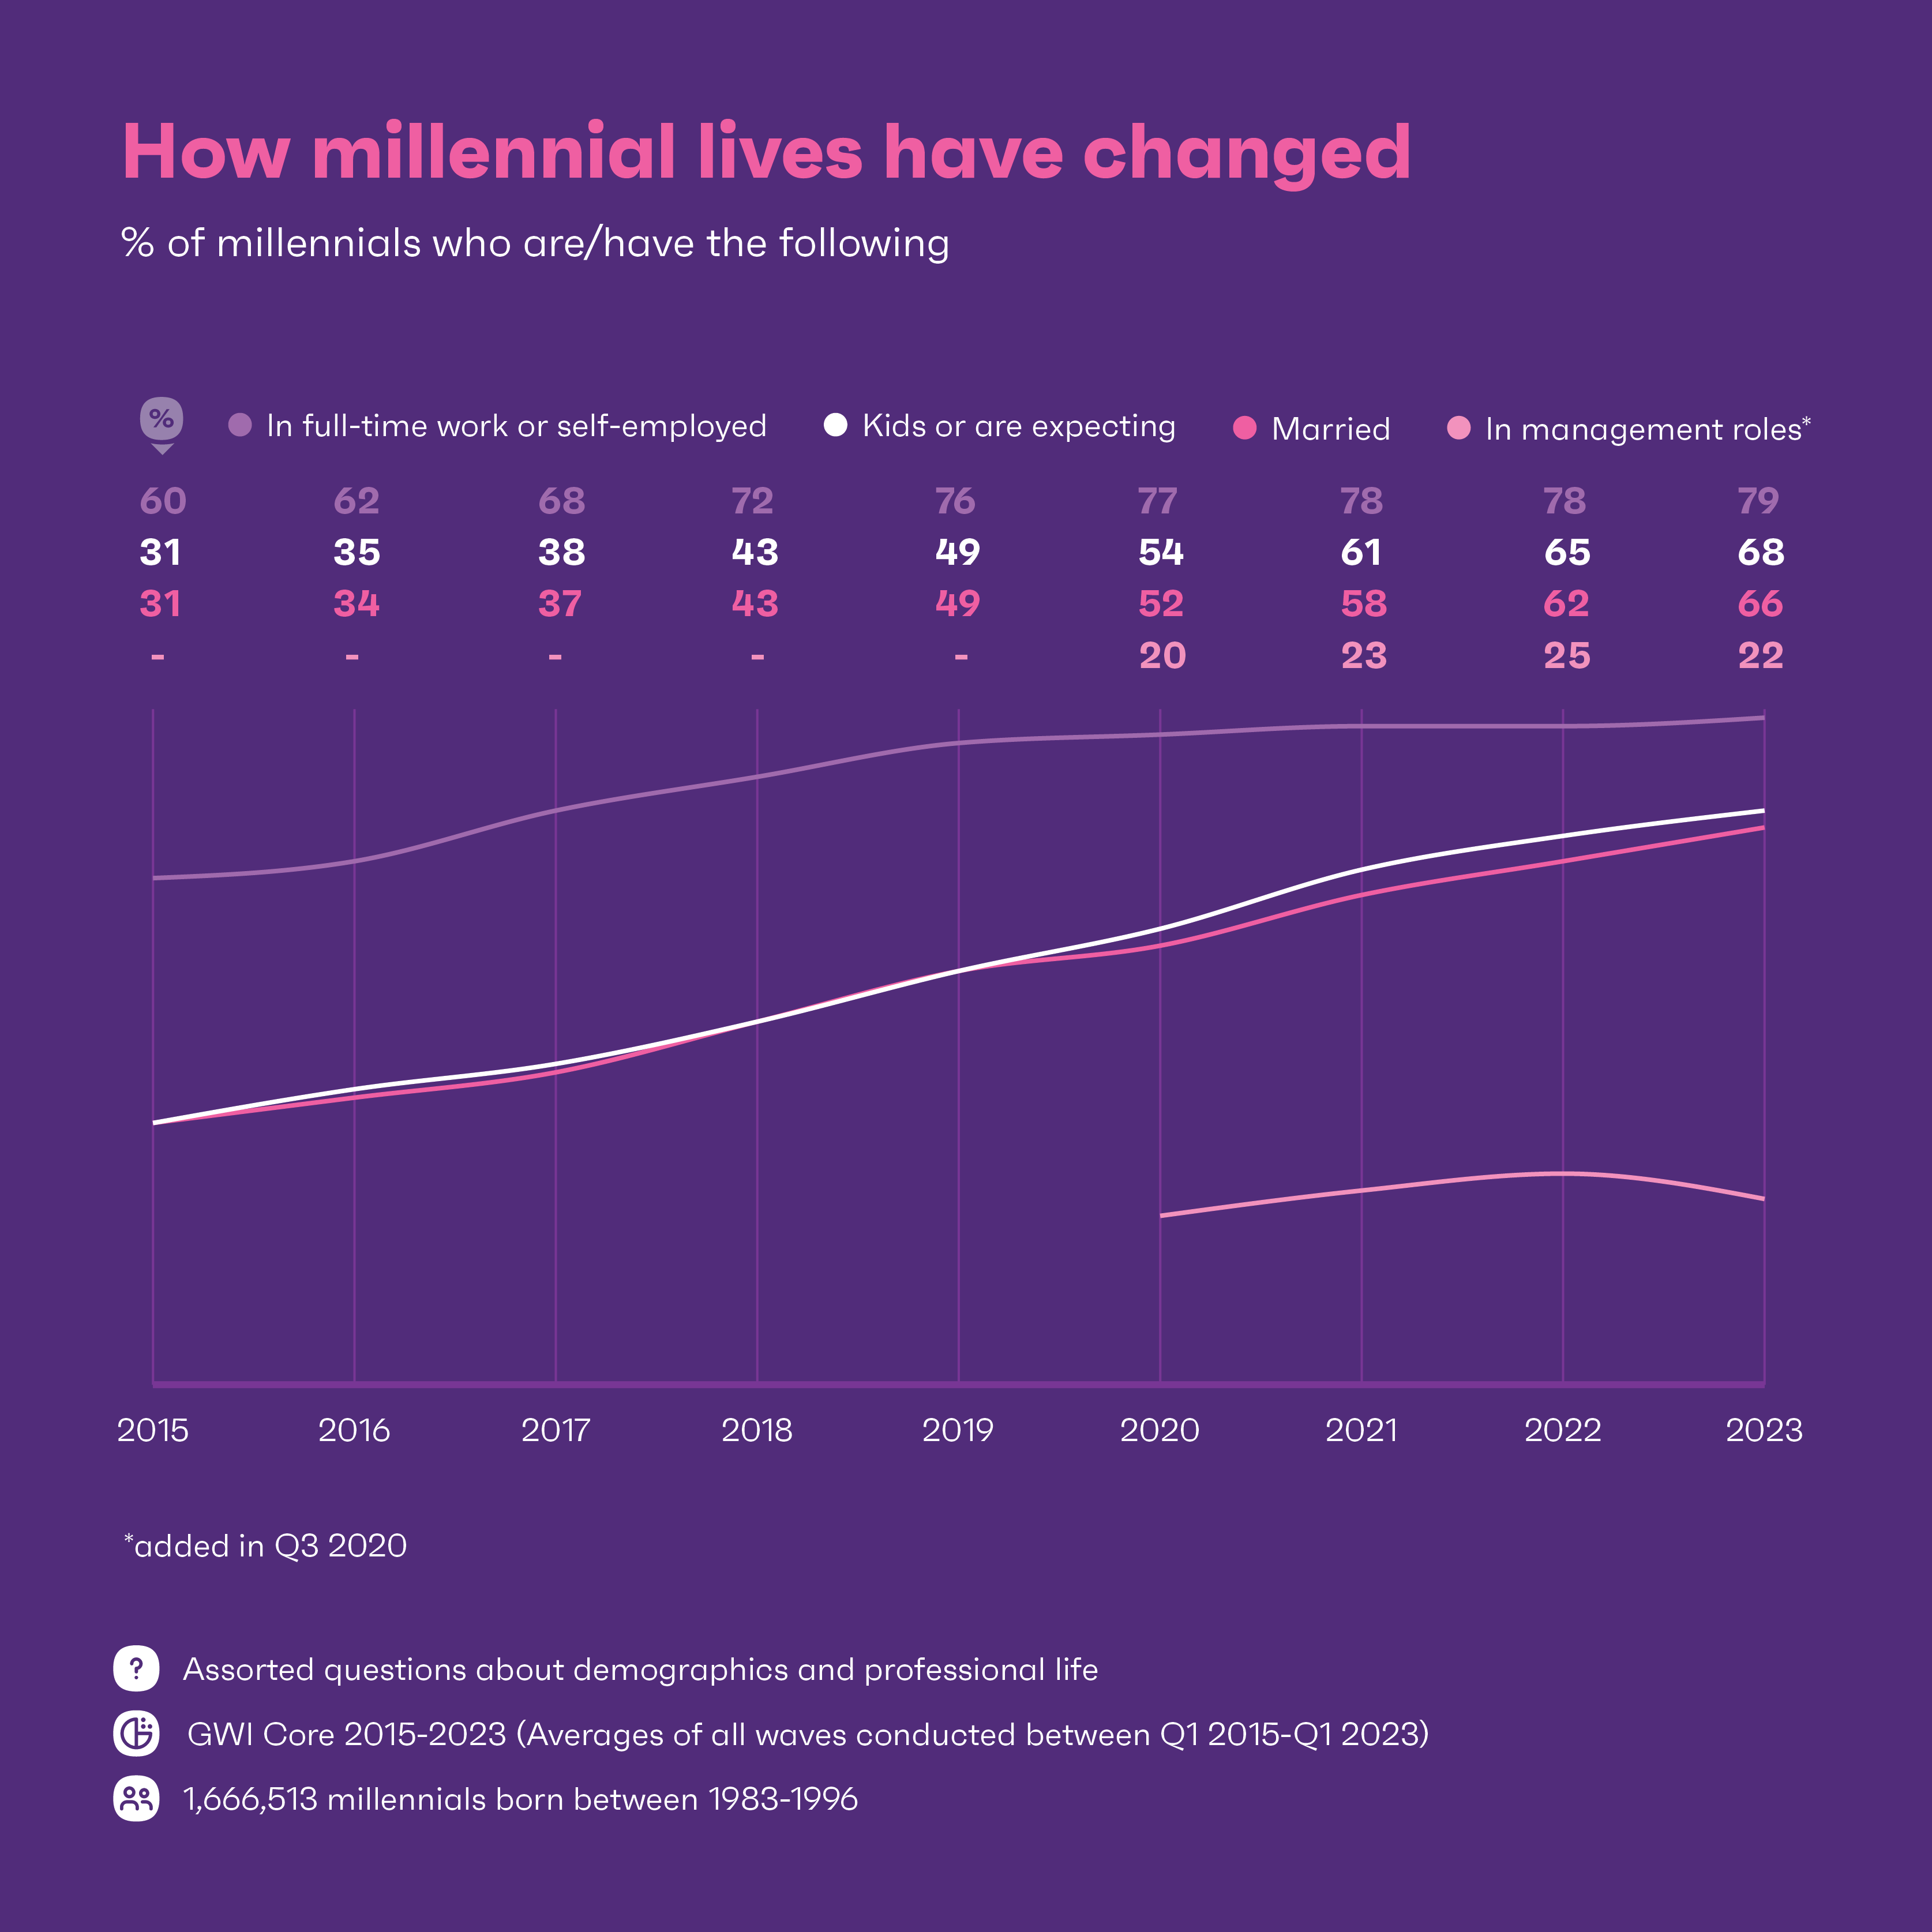 Chart showing life stages of millennials